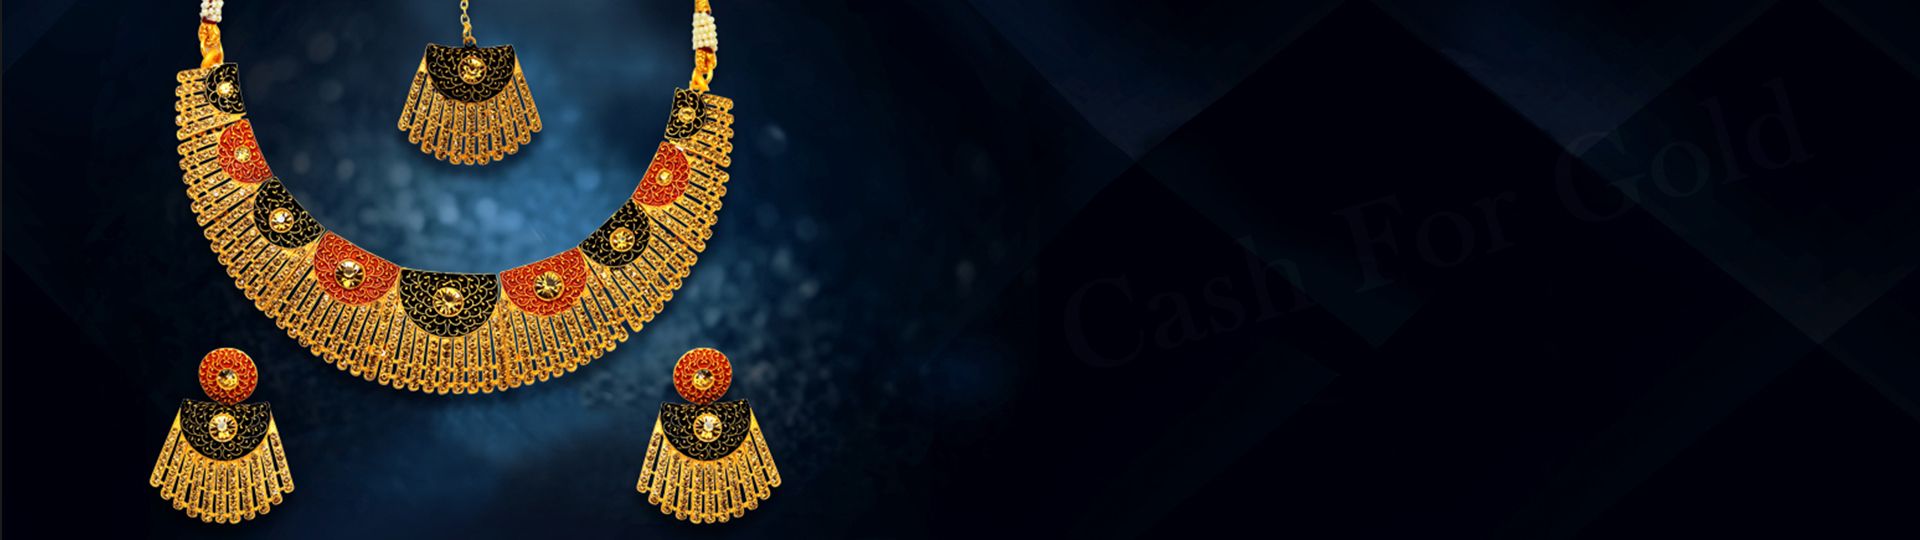 Gold Buyer in Delhi | Selling Gold jewellery | Cash For Gold - No.1 Gold Buyer Delhi NCR